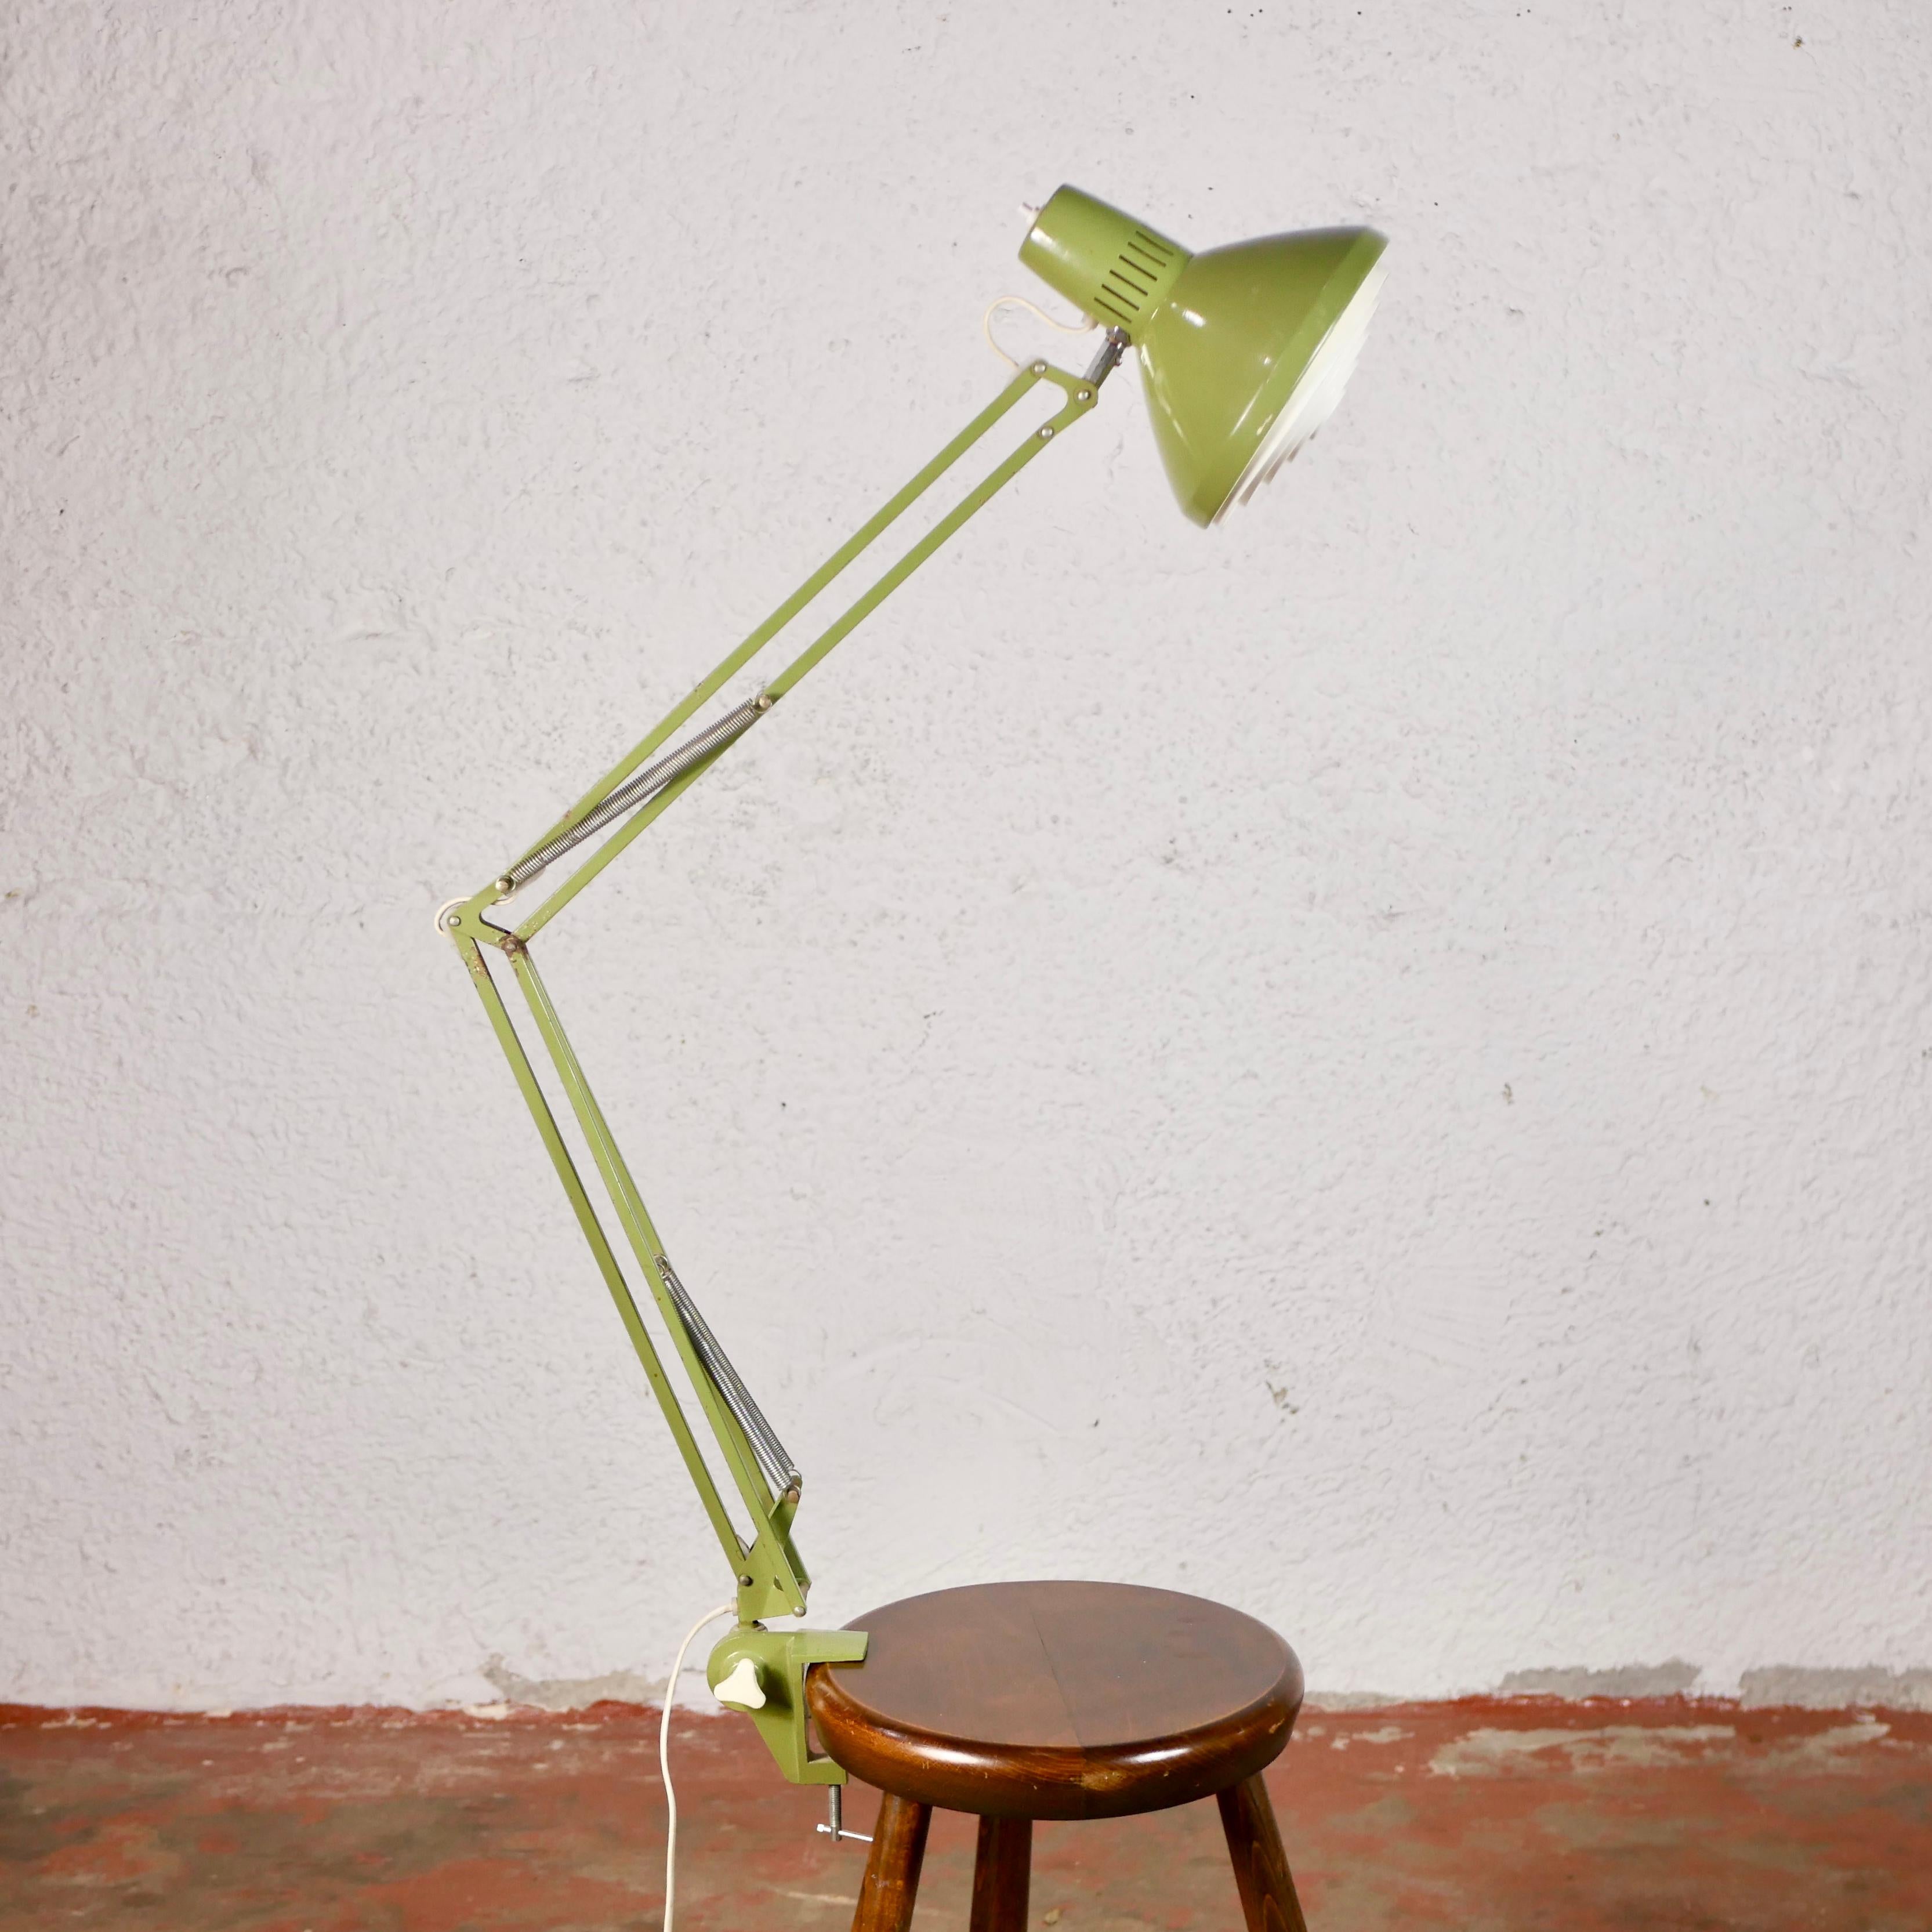 Big articulated desk lamp by Ledu, made in Sweden in the 1970s. Was a workshop lamp before.
Nice patina.
2 arms of 50cm each, head around 20cm.